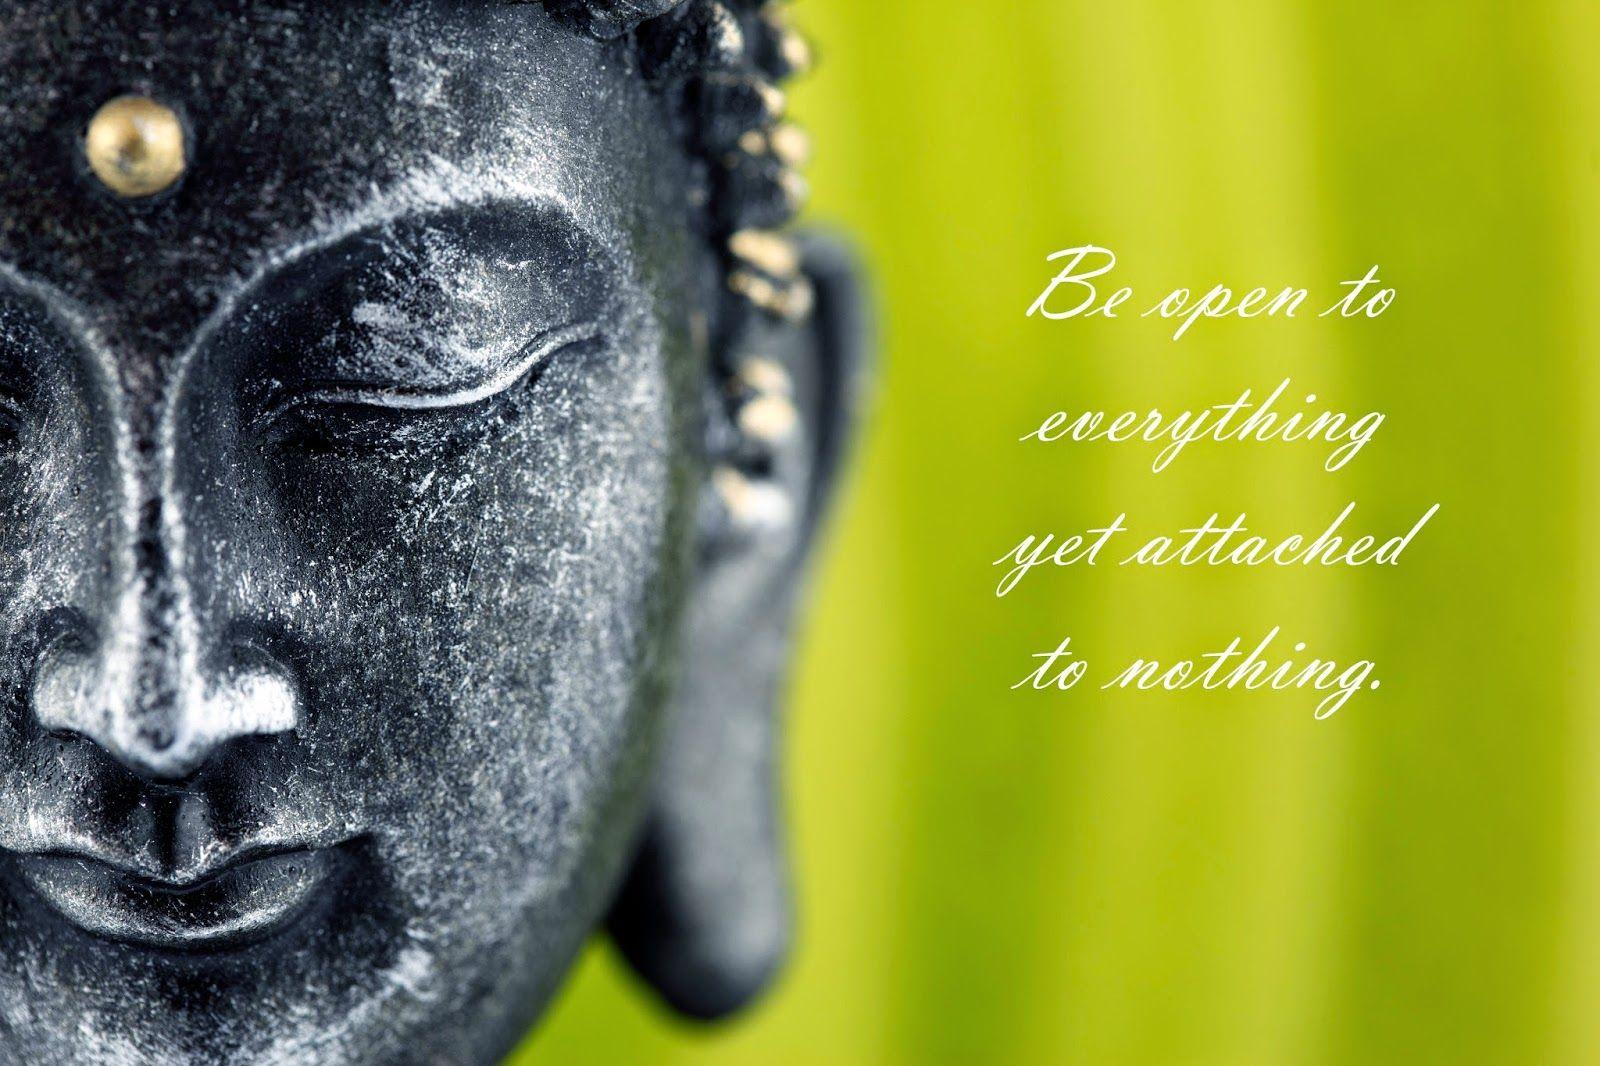 Buddha wallpaper with quotes on life and happiness HD picture